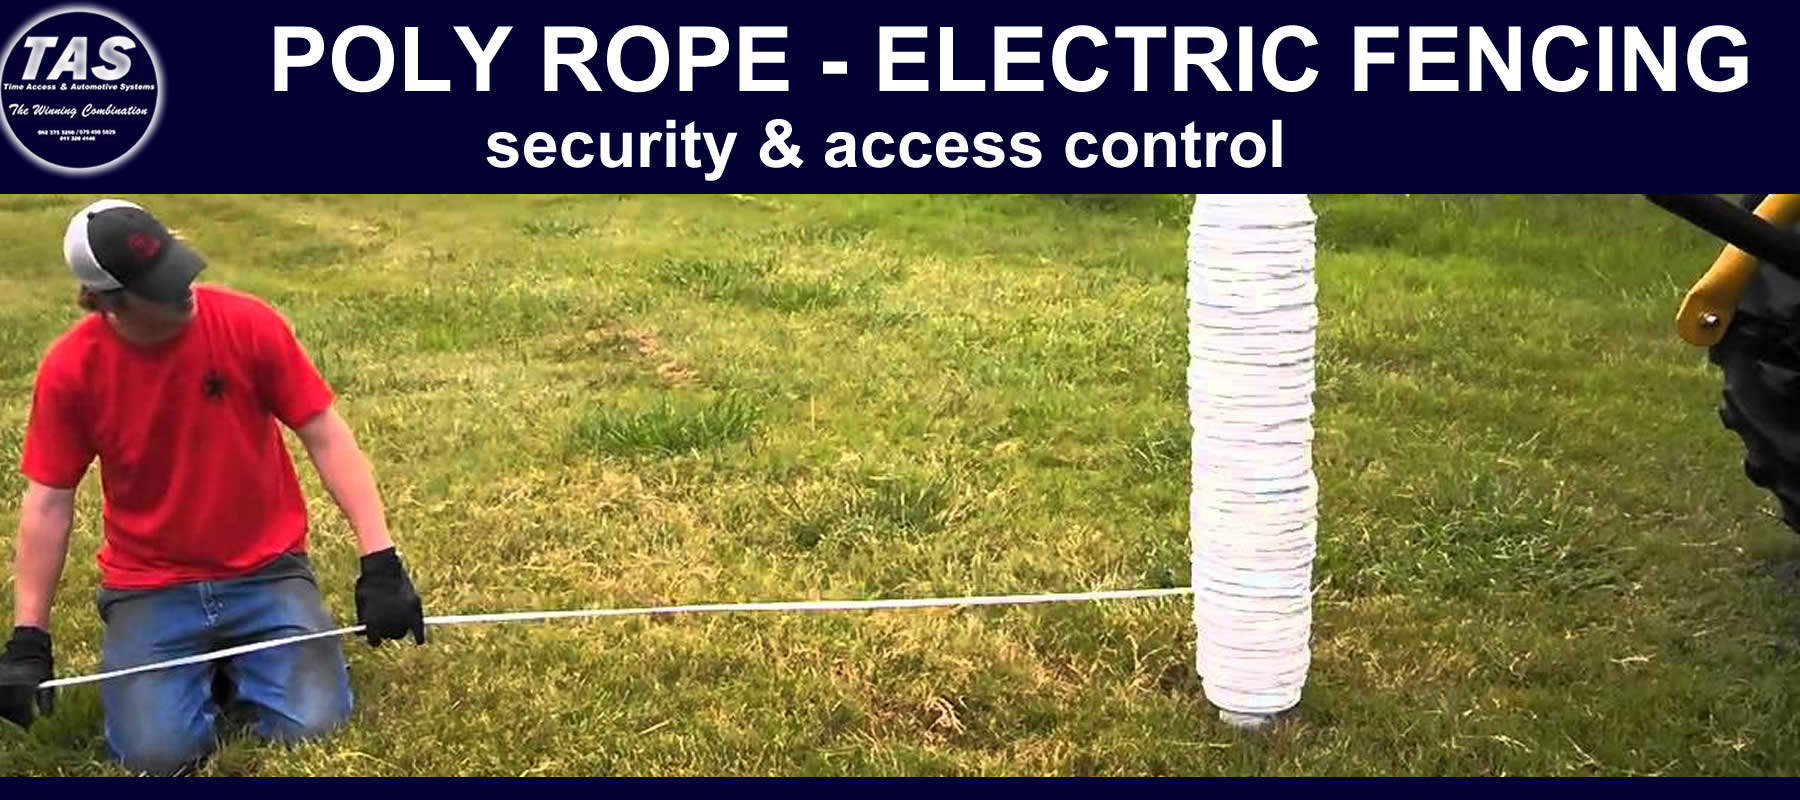 Poly Rope electric fencing security control banner